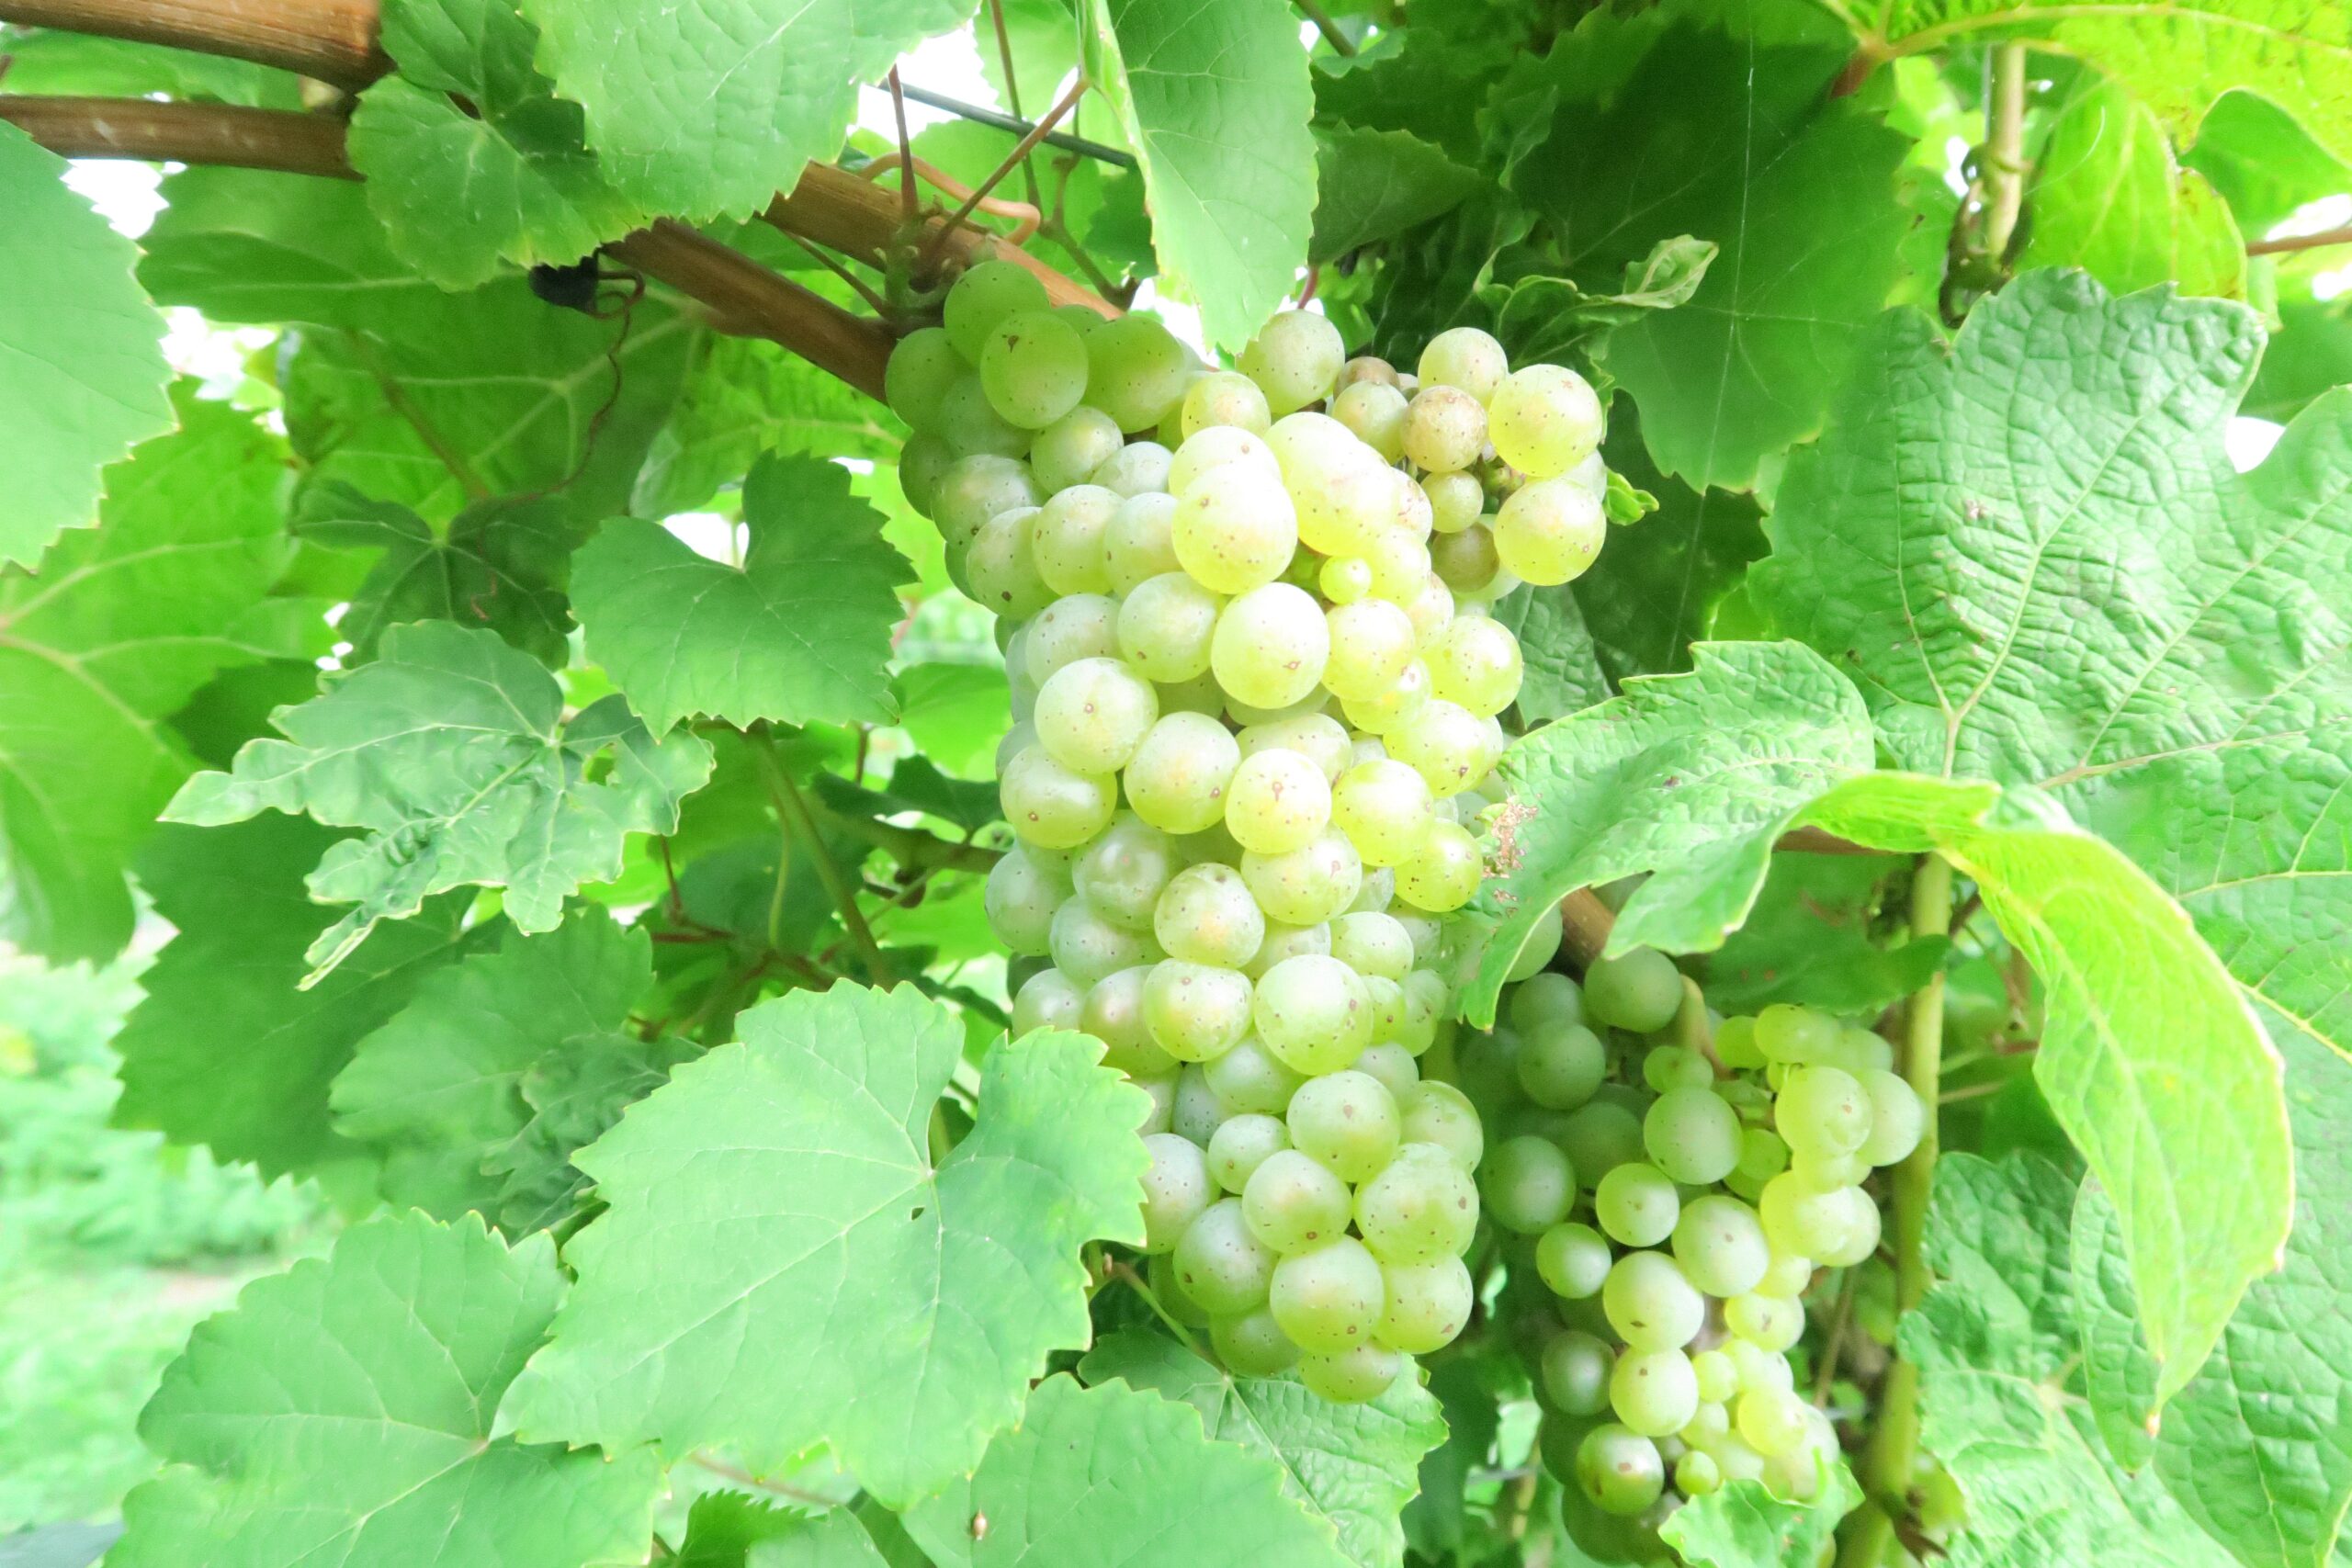 Where is Vermont - Seyval Blanc Grapes